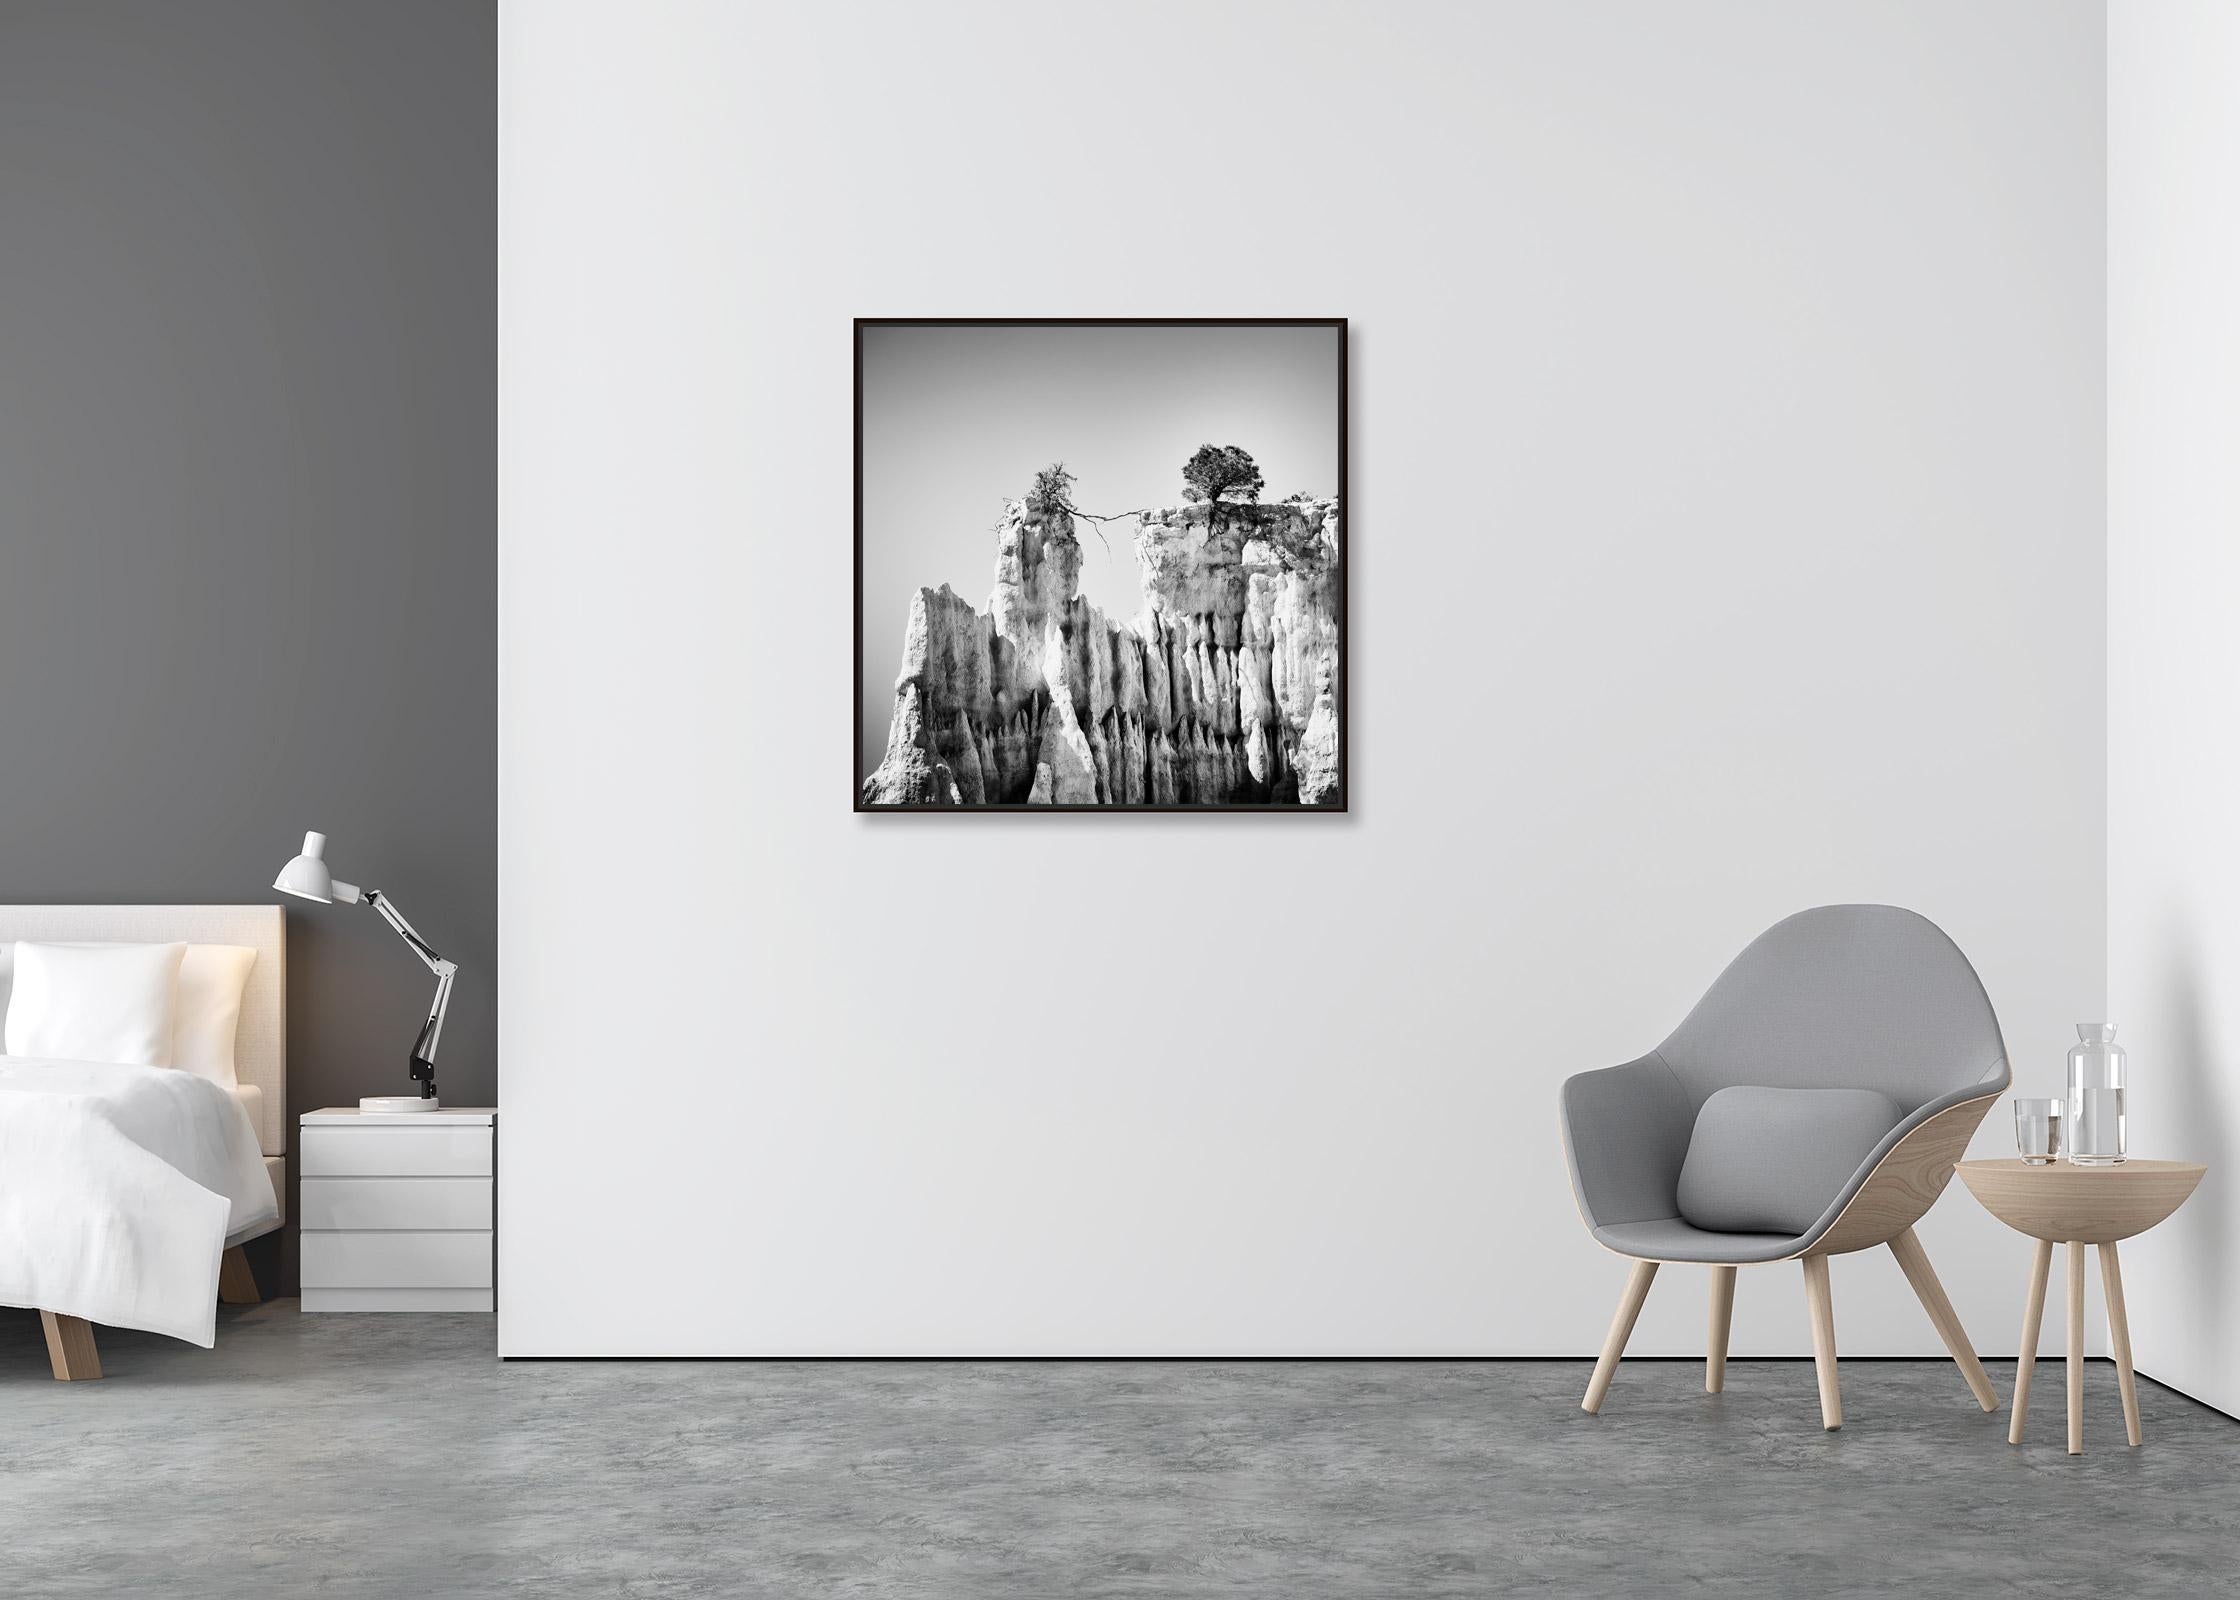 Organs of Ille-sur-Tet, Organ Pipes, black and white art photography, landscape - Contemporary Photograph by Gerald Berghammer